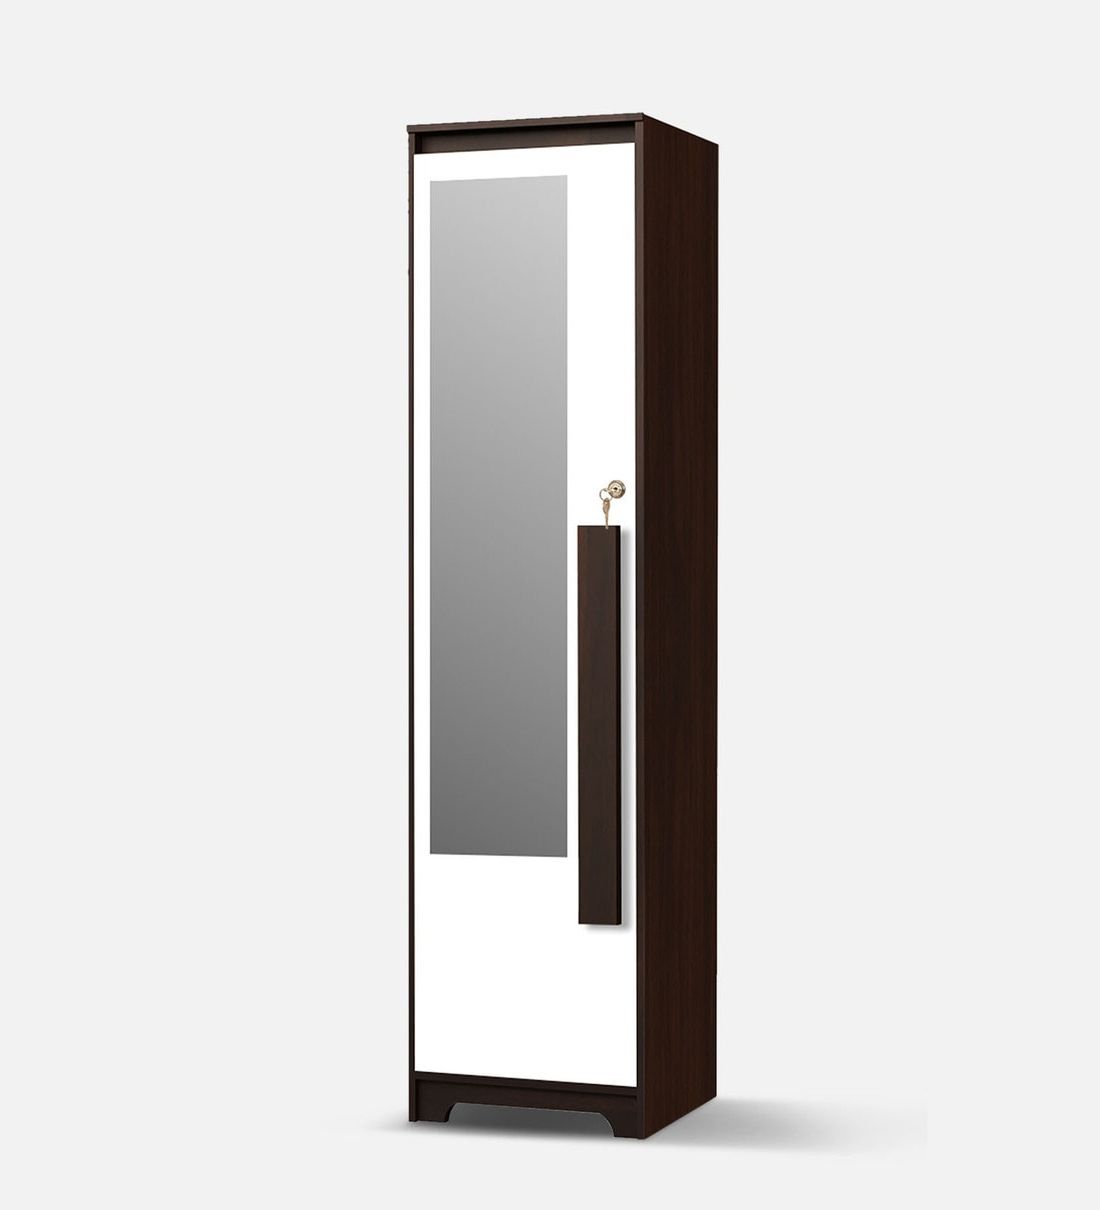 Buy Regal Grand 1 Door Wardrobe In Walnut & White Finish With Mirror At 48%  Offtrevi Furniture | Pepperfry Inside One Door Wardrobes With Mirror (View 12 of 20)